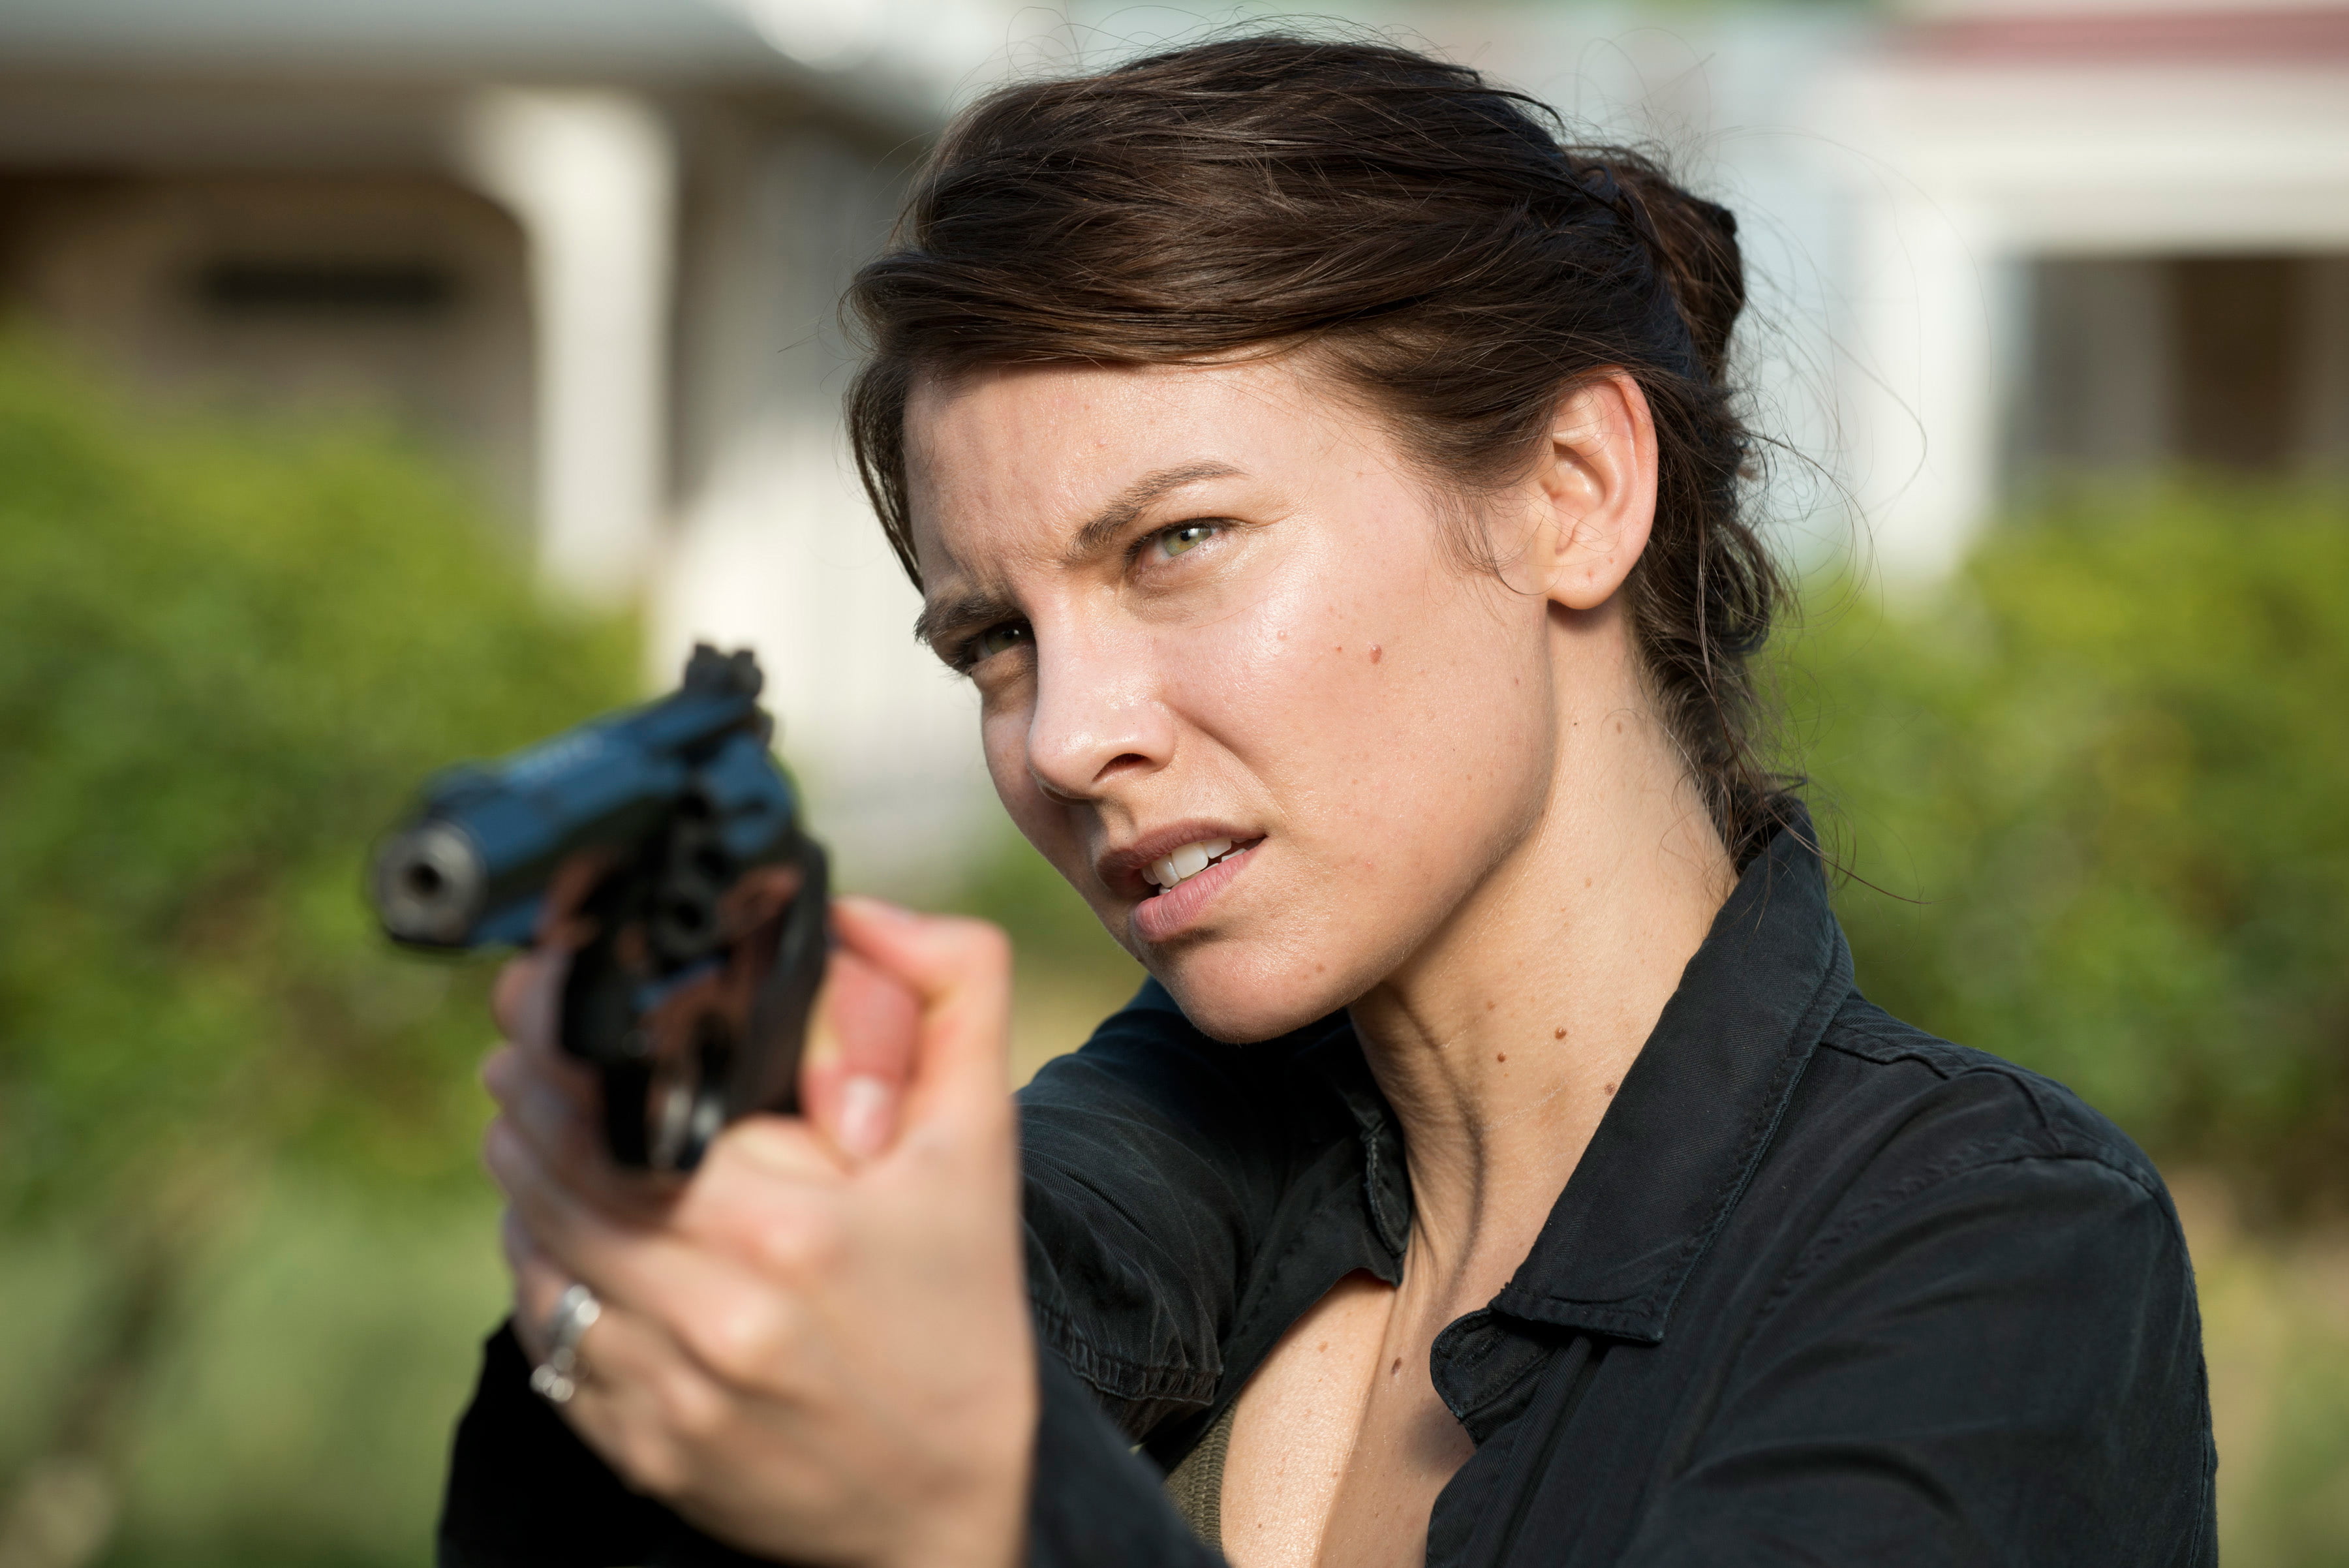 Maggie, The Walking Dead, Lauren Cohan, the sixth season, one person